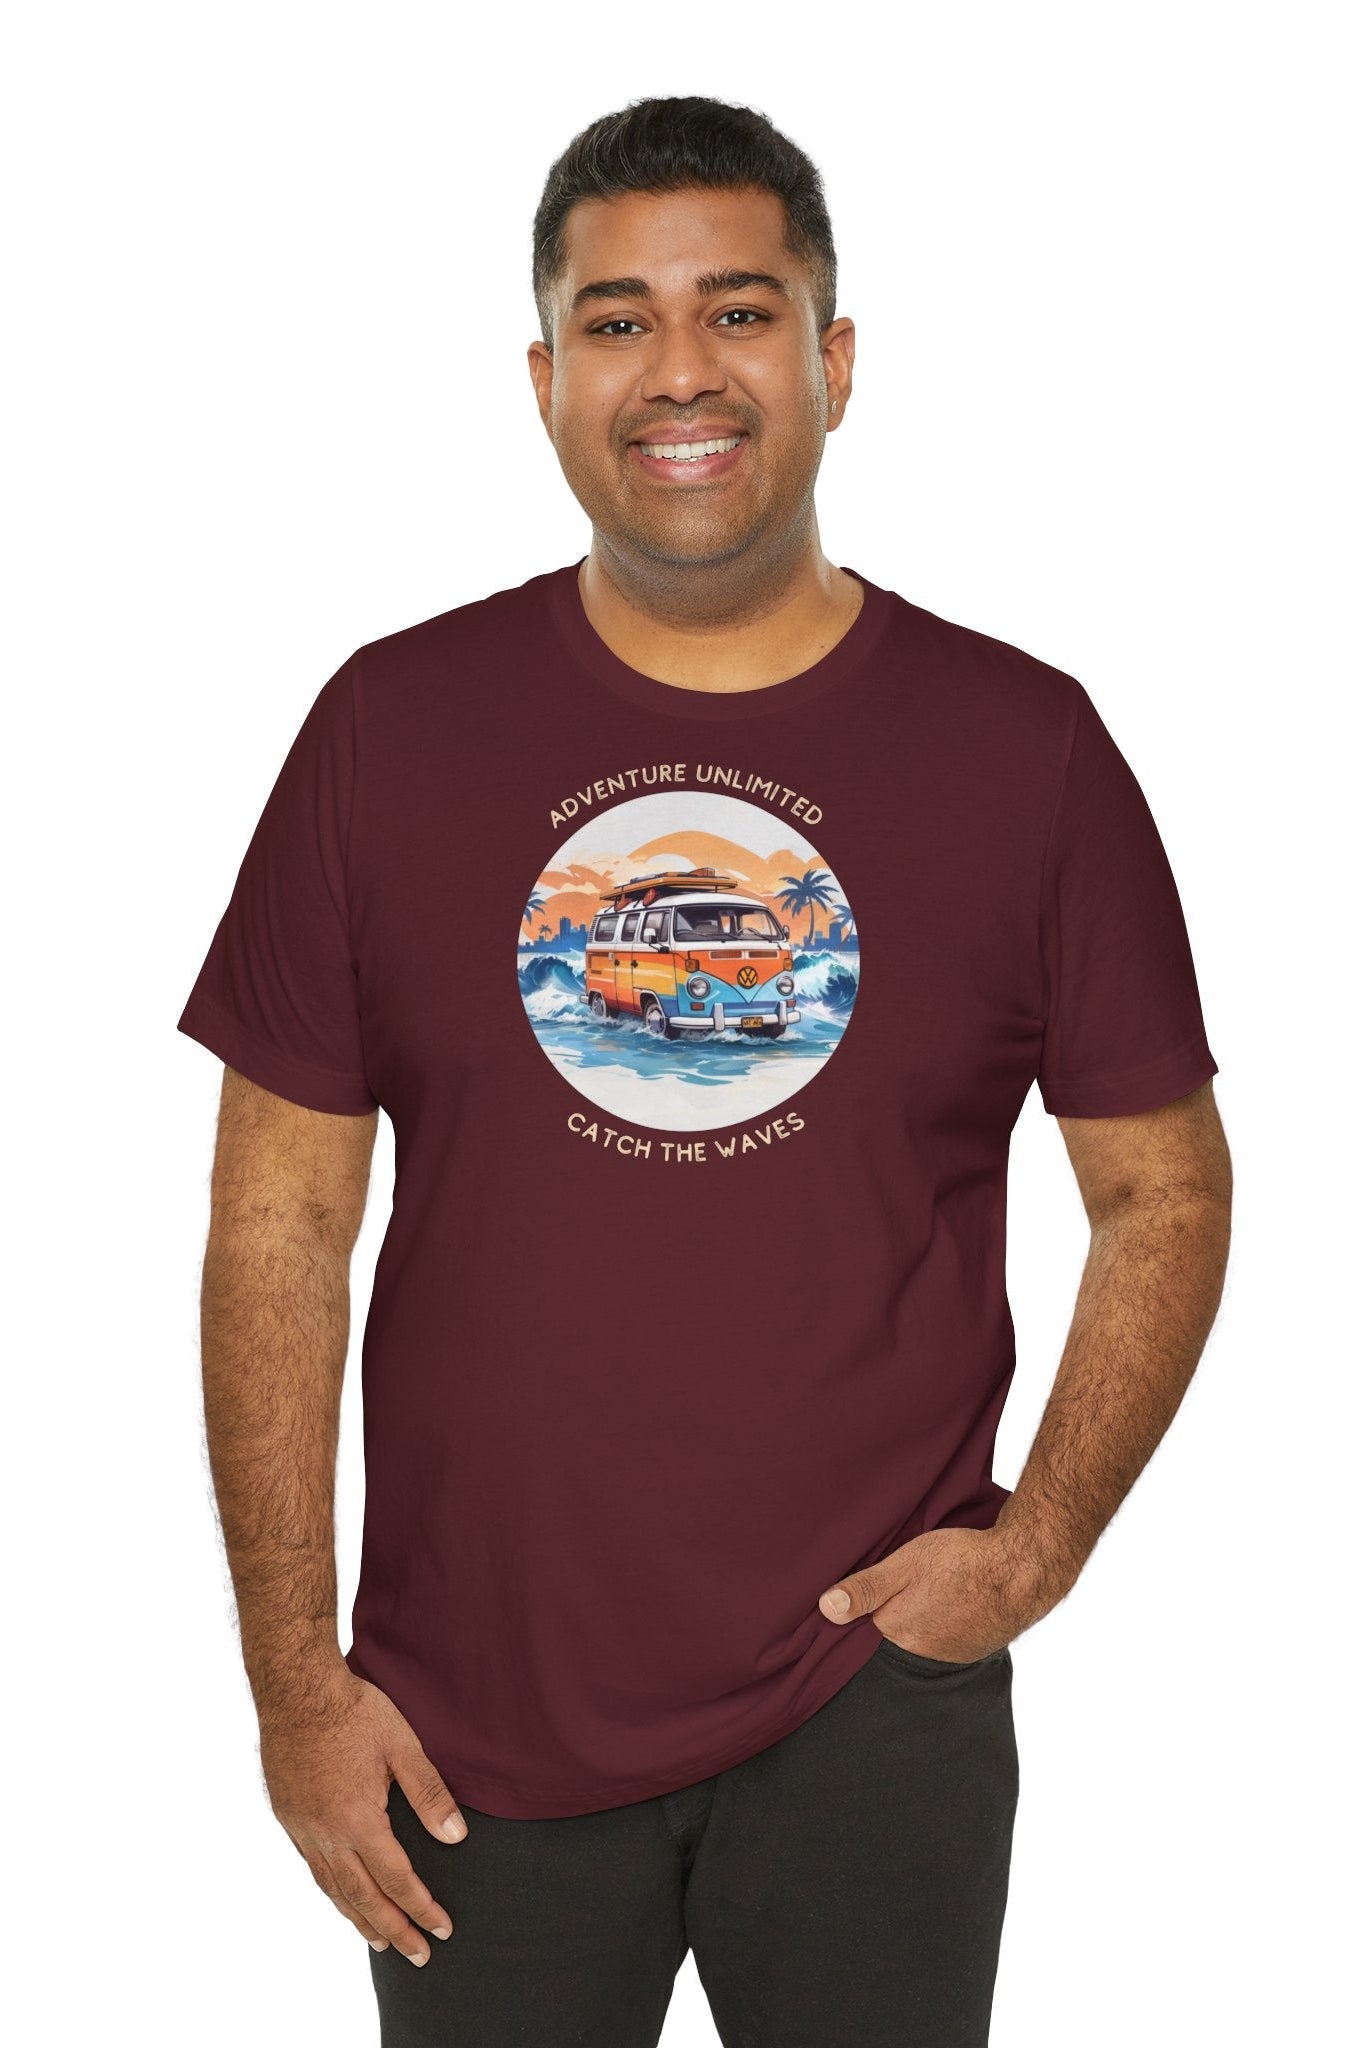 Printed maroon t-shirt featuring ’Adventure Unlimited’ design